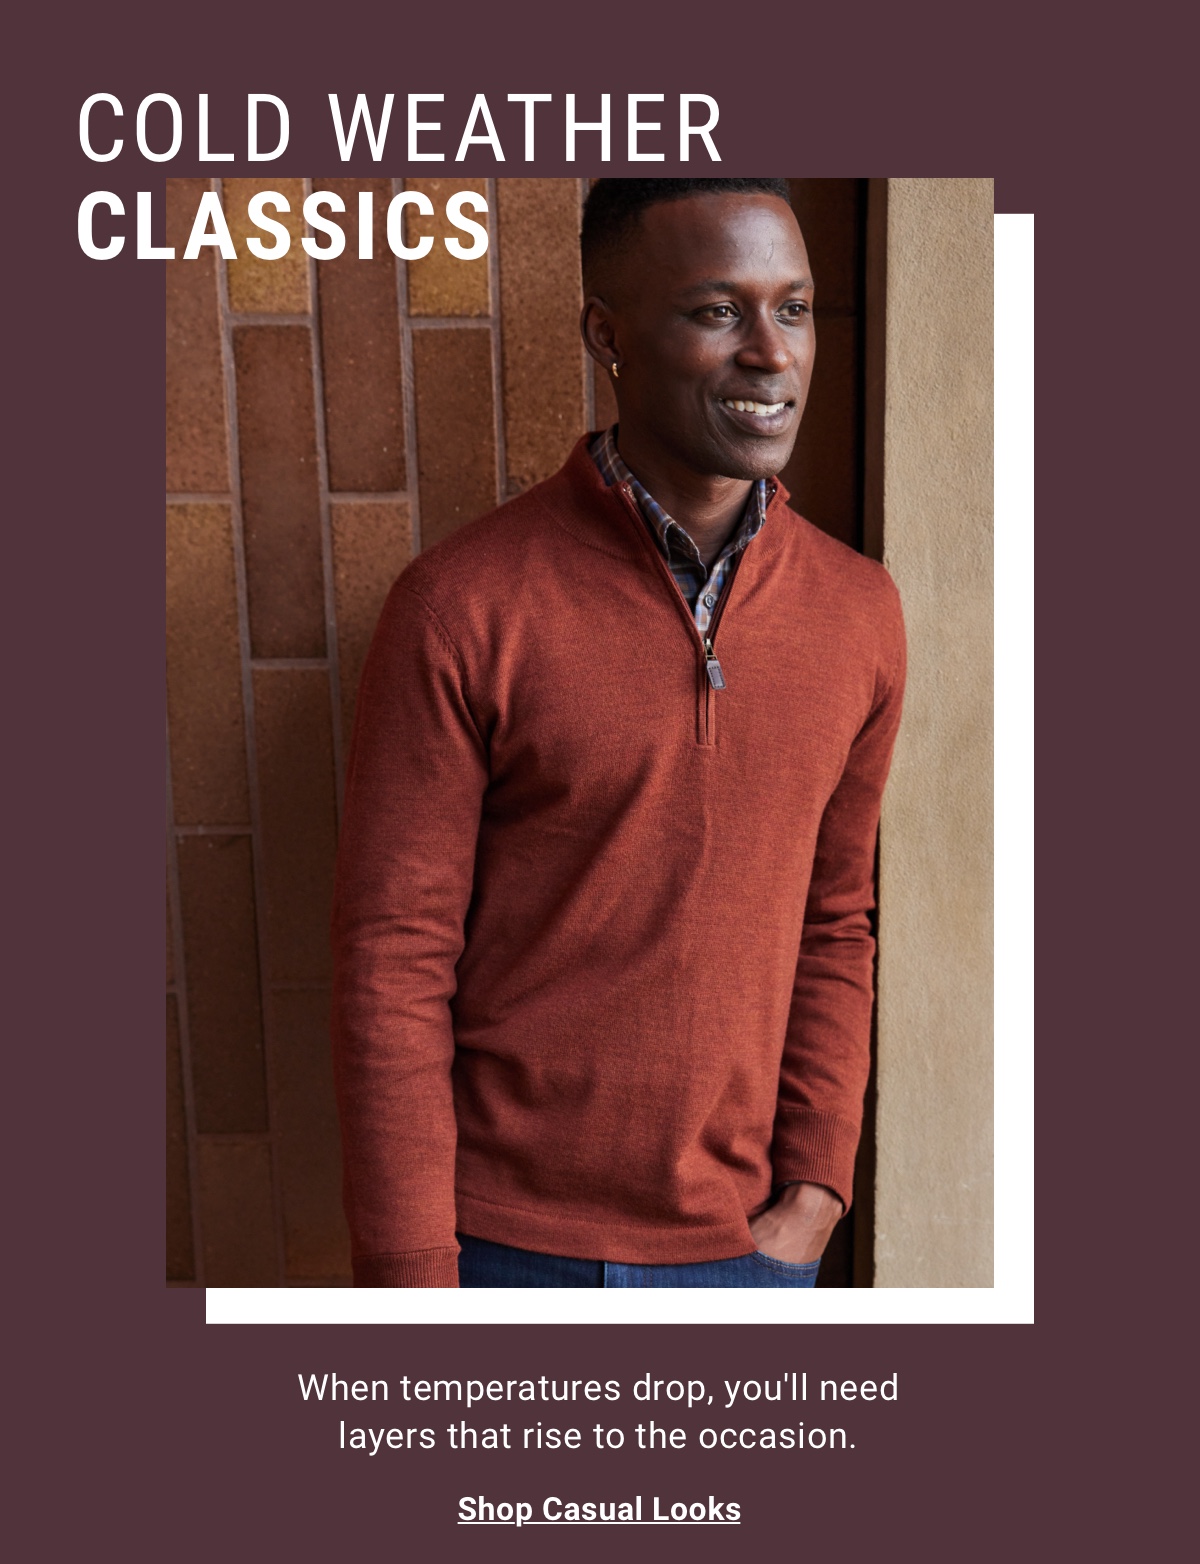 Cold weather classics. When temperatures drop, you ll need layers that rise to the occasion. Shop Casual Looks